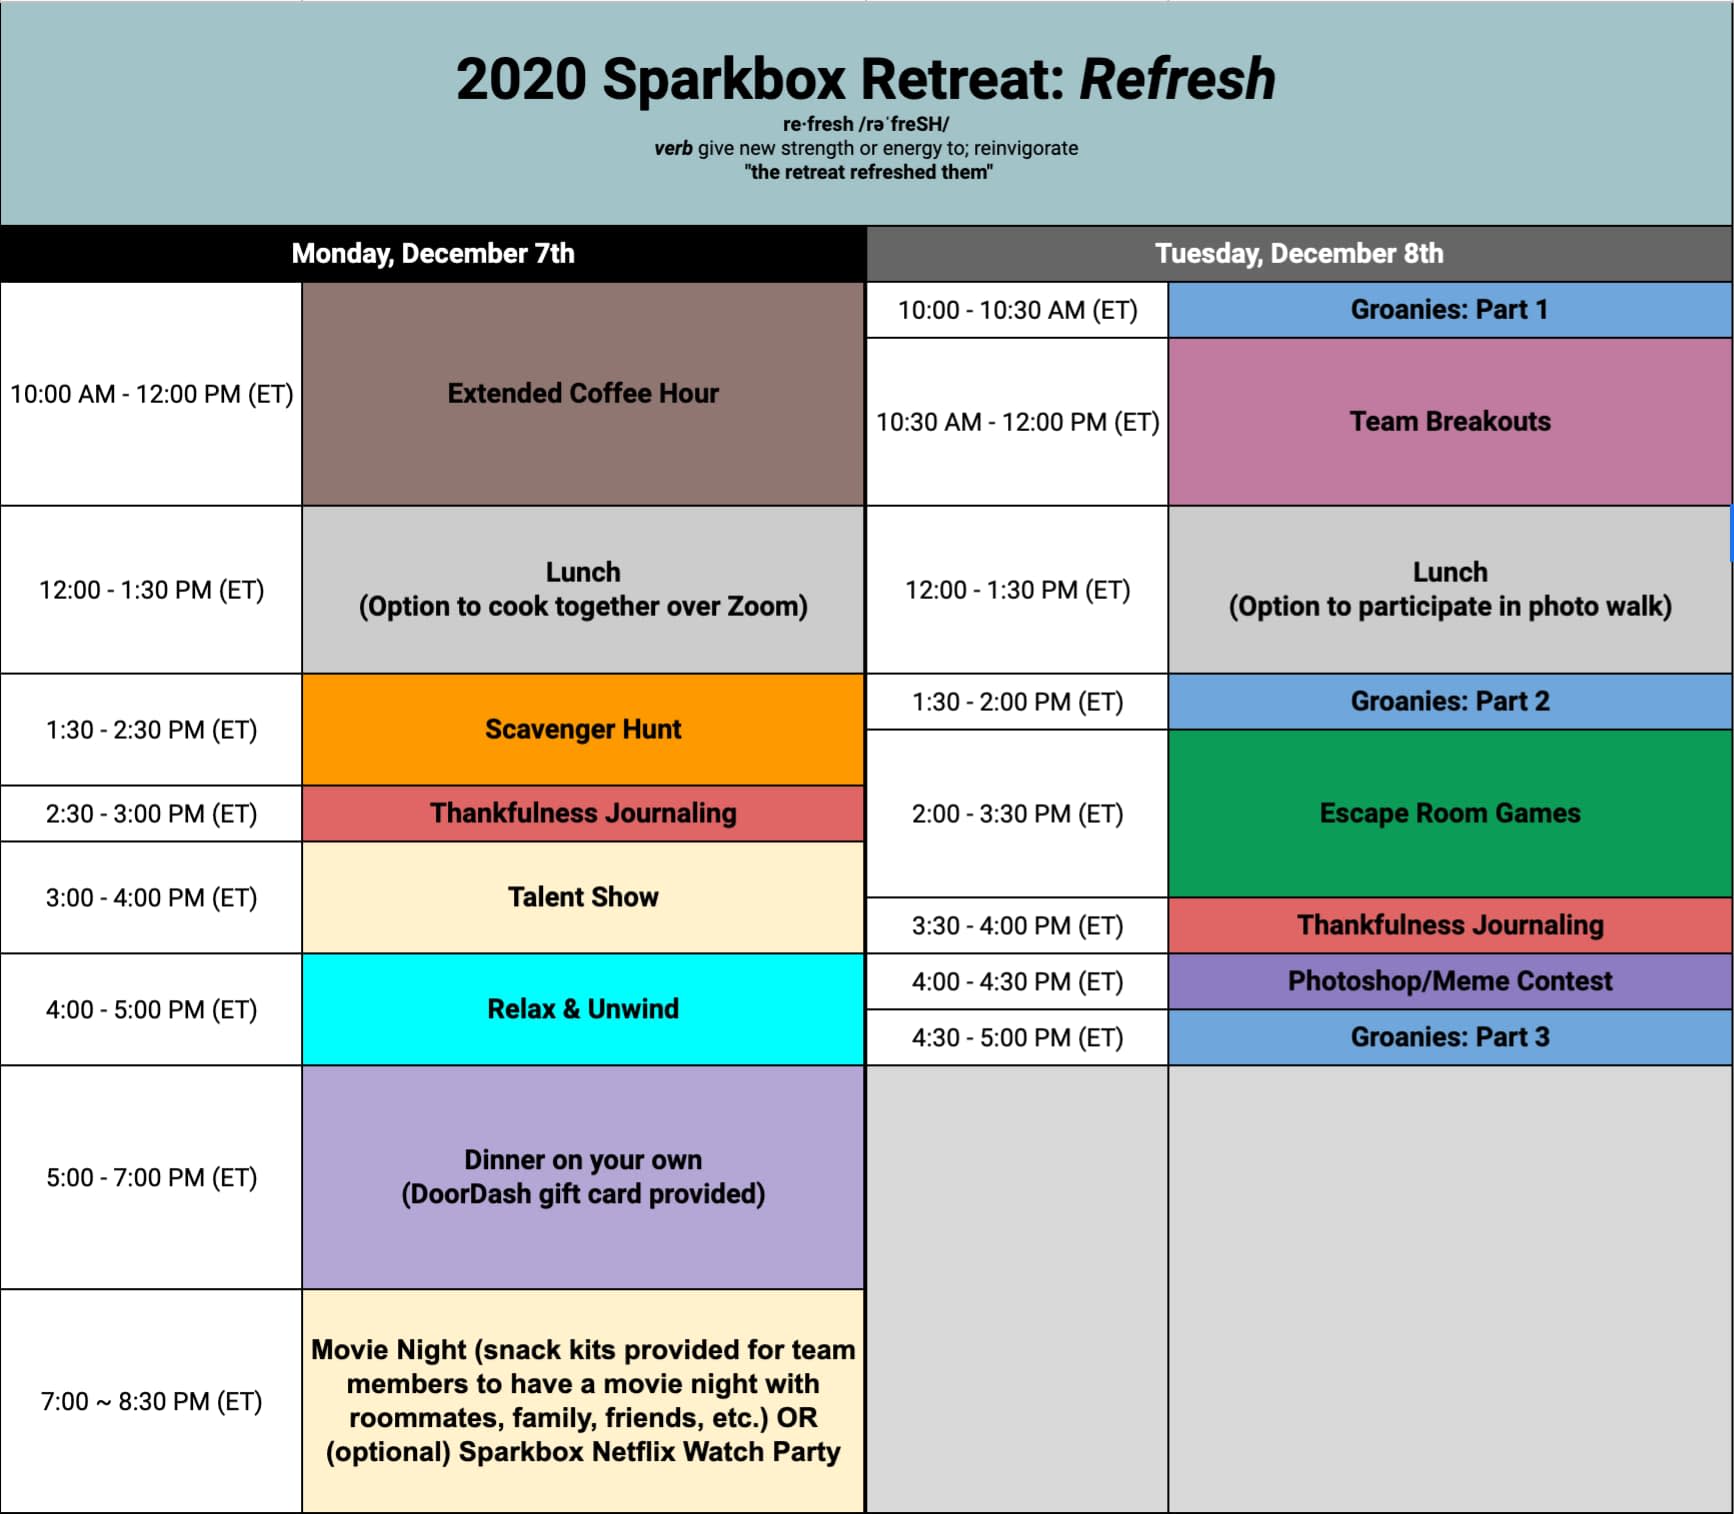 The retreat schedule was broken into two days, Monday and Tuesday. Each activity was blocked into 30 minute to 2 hour time blocks.